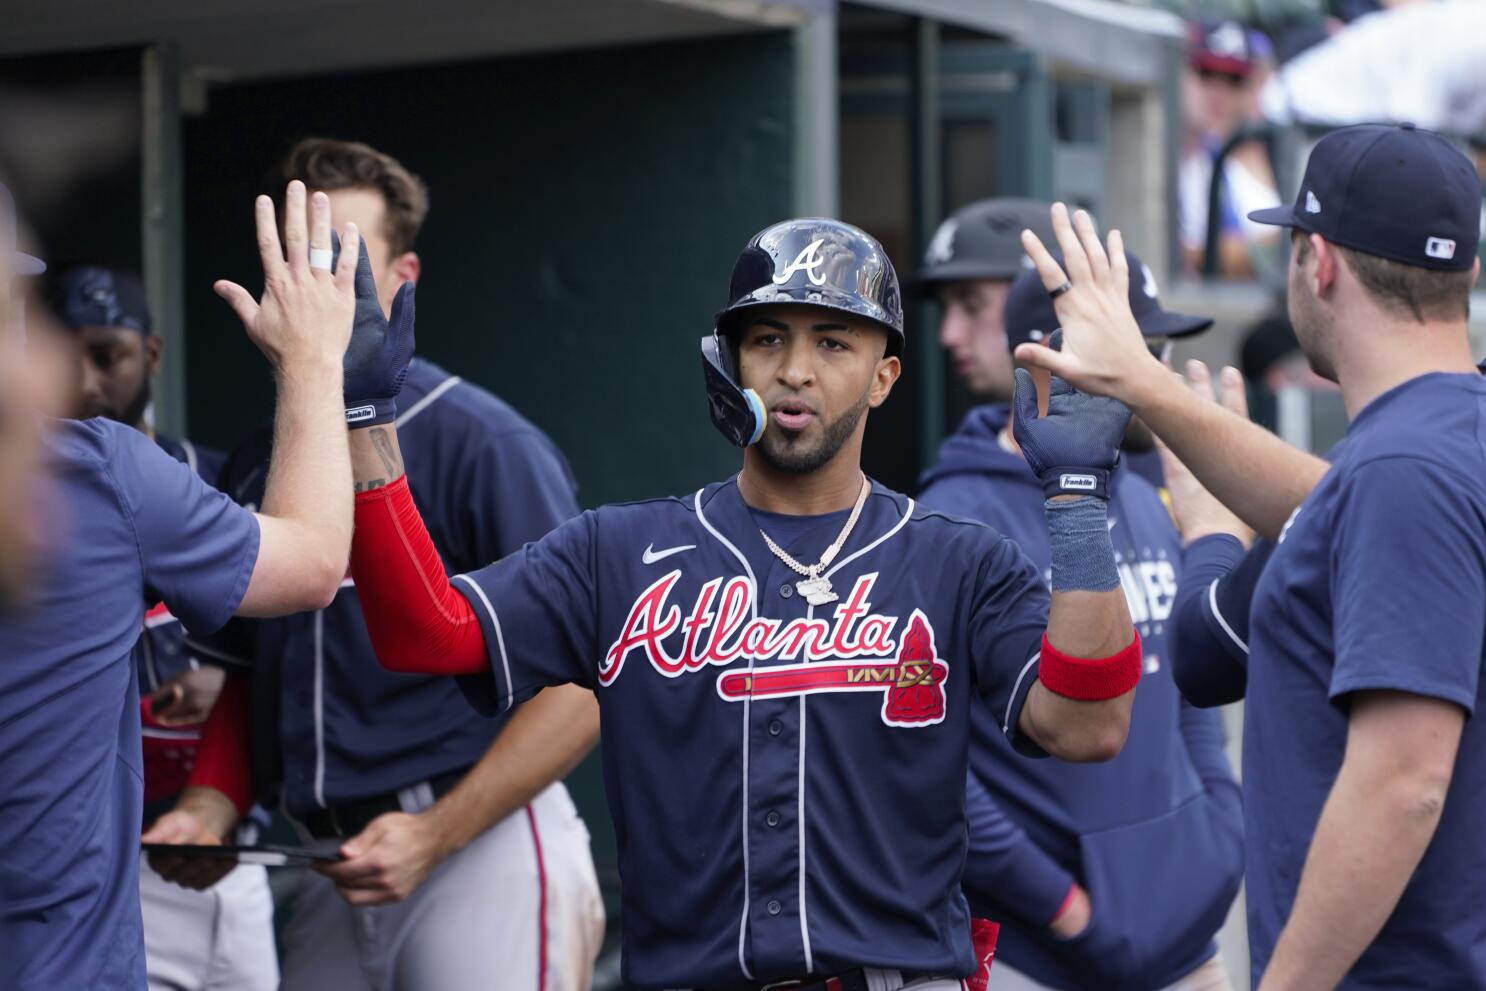 Rosario homer leads Braves to sweep Tigers in doubleheader - The